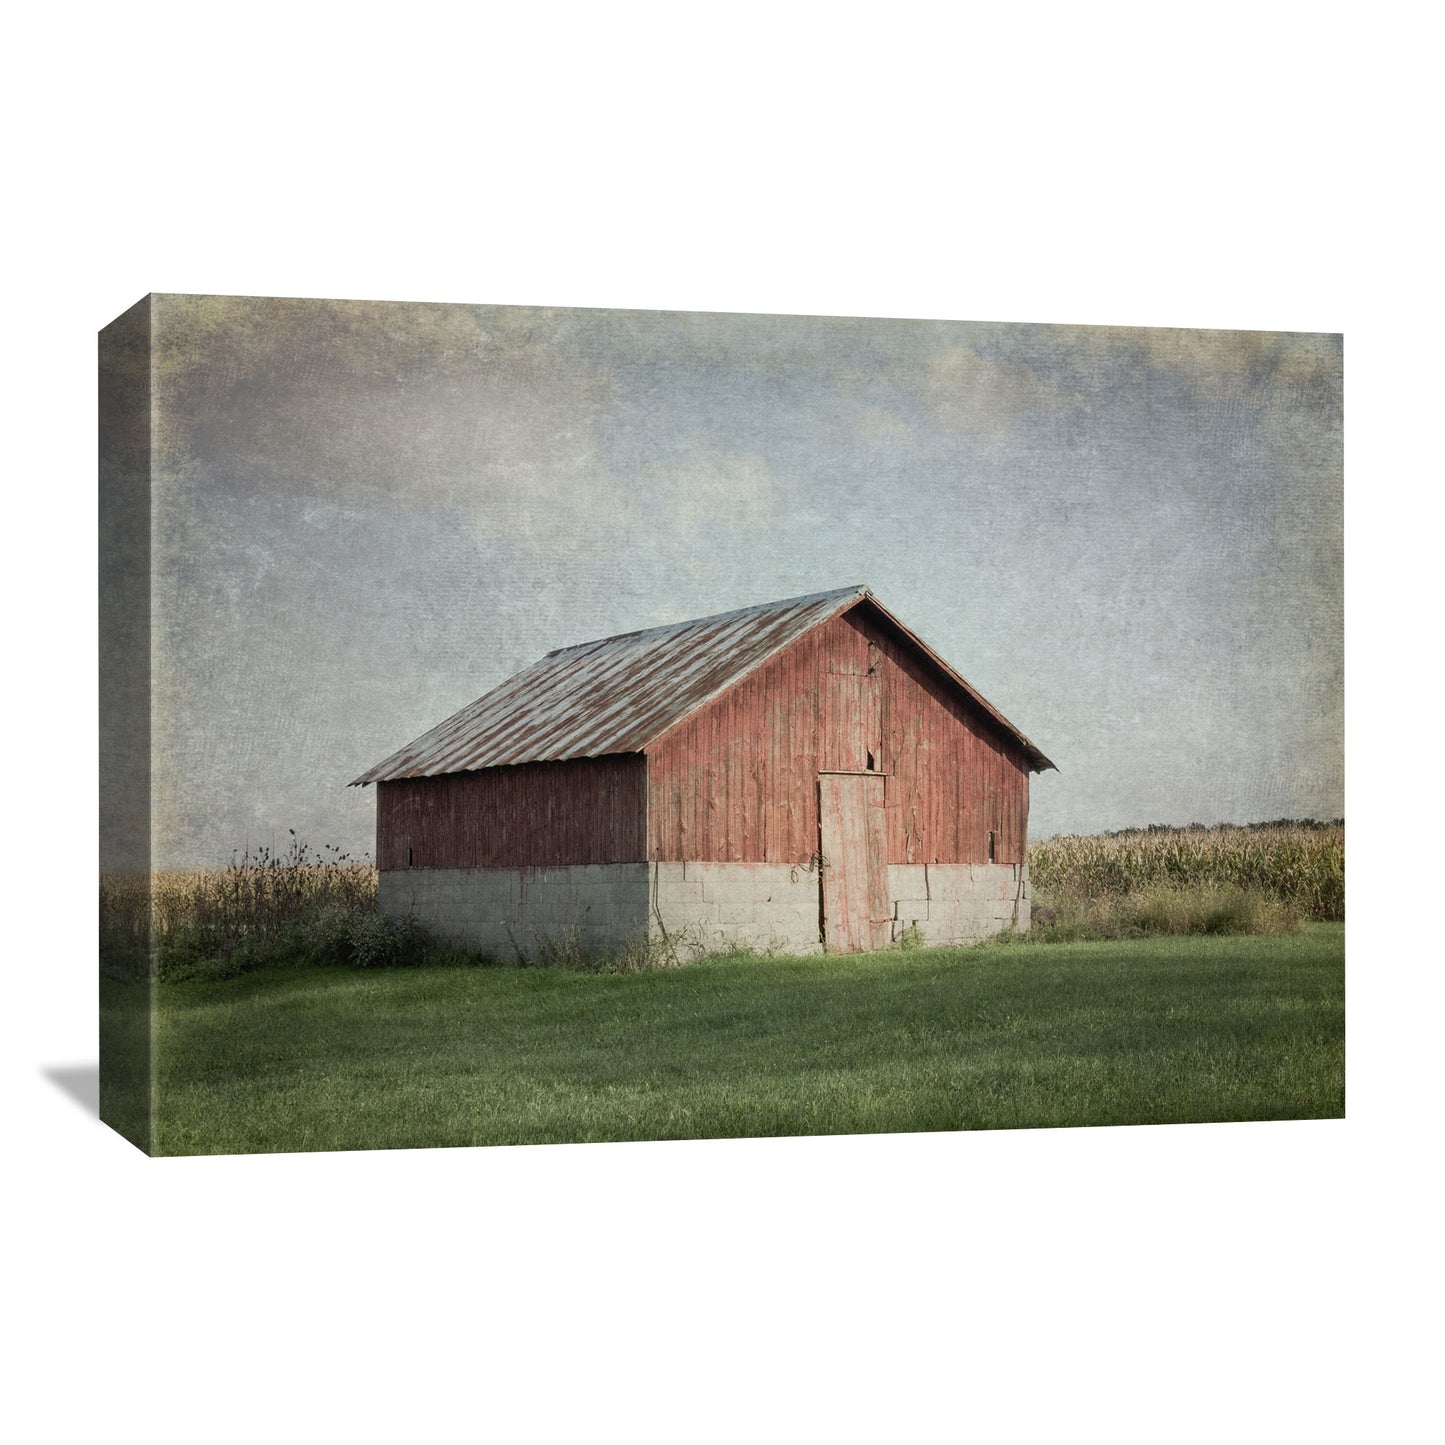 Farmhouse wall art featuring a old red barn in an antique/vintage style